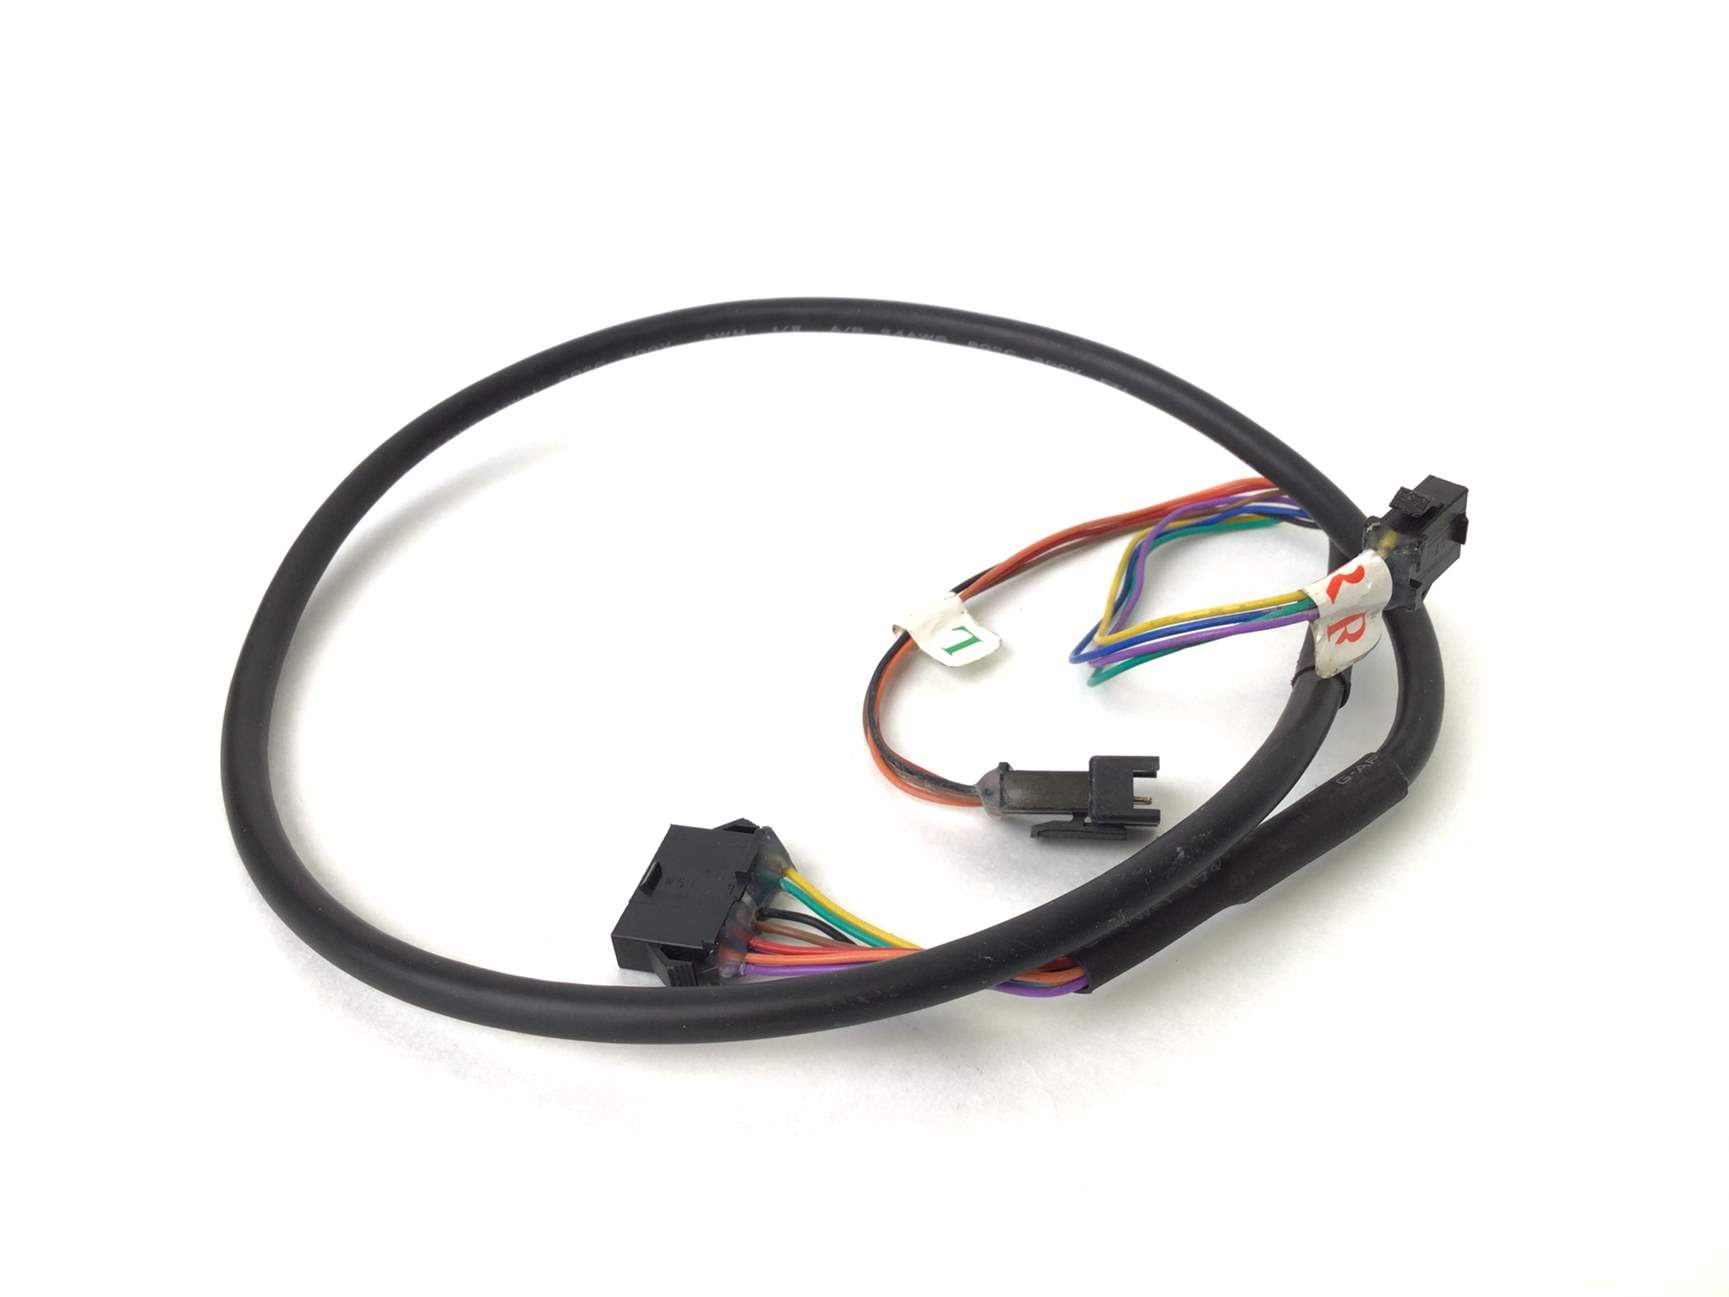 Console to Pulse Grip Wire (Used)